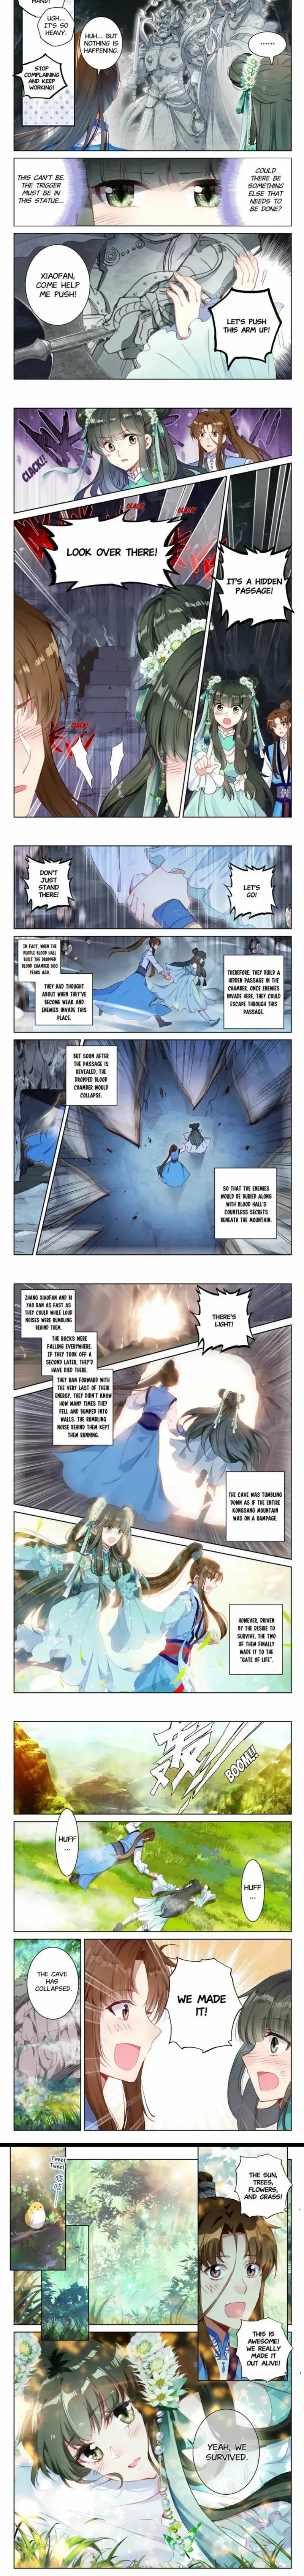 Celestial Destroyer - Page 3